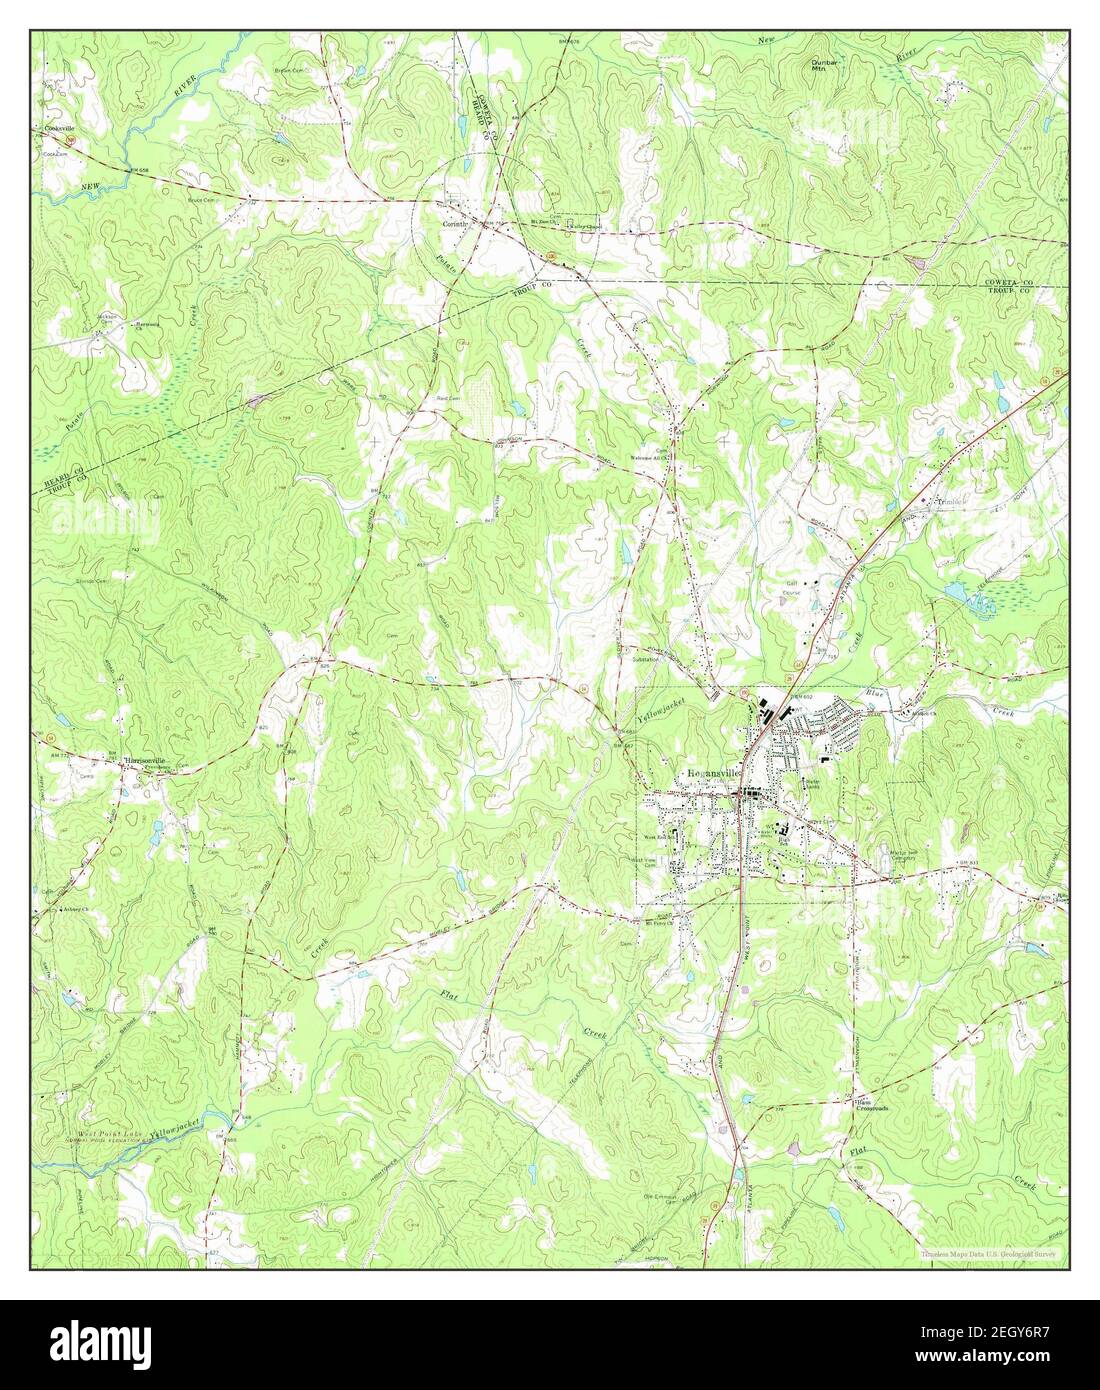 Hogansville, Georgia, map 1964, 1:24000, United States of America by Timeless Maps, data U.S. Geological Survey Stock Photo